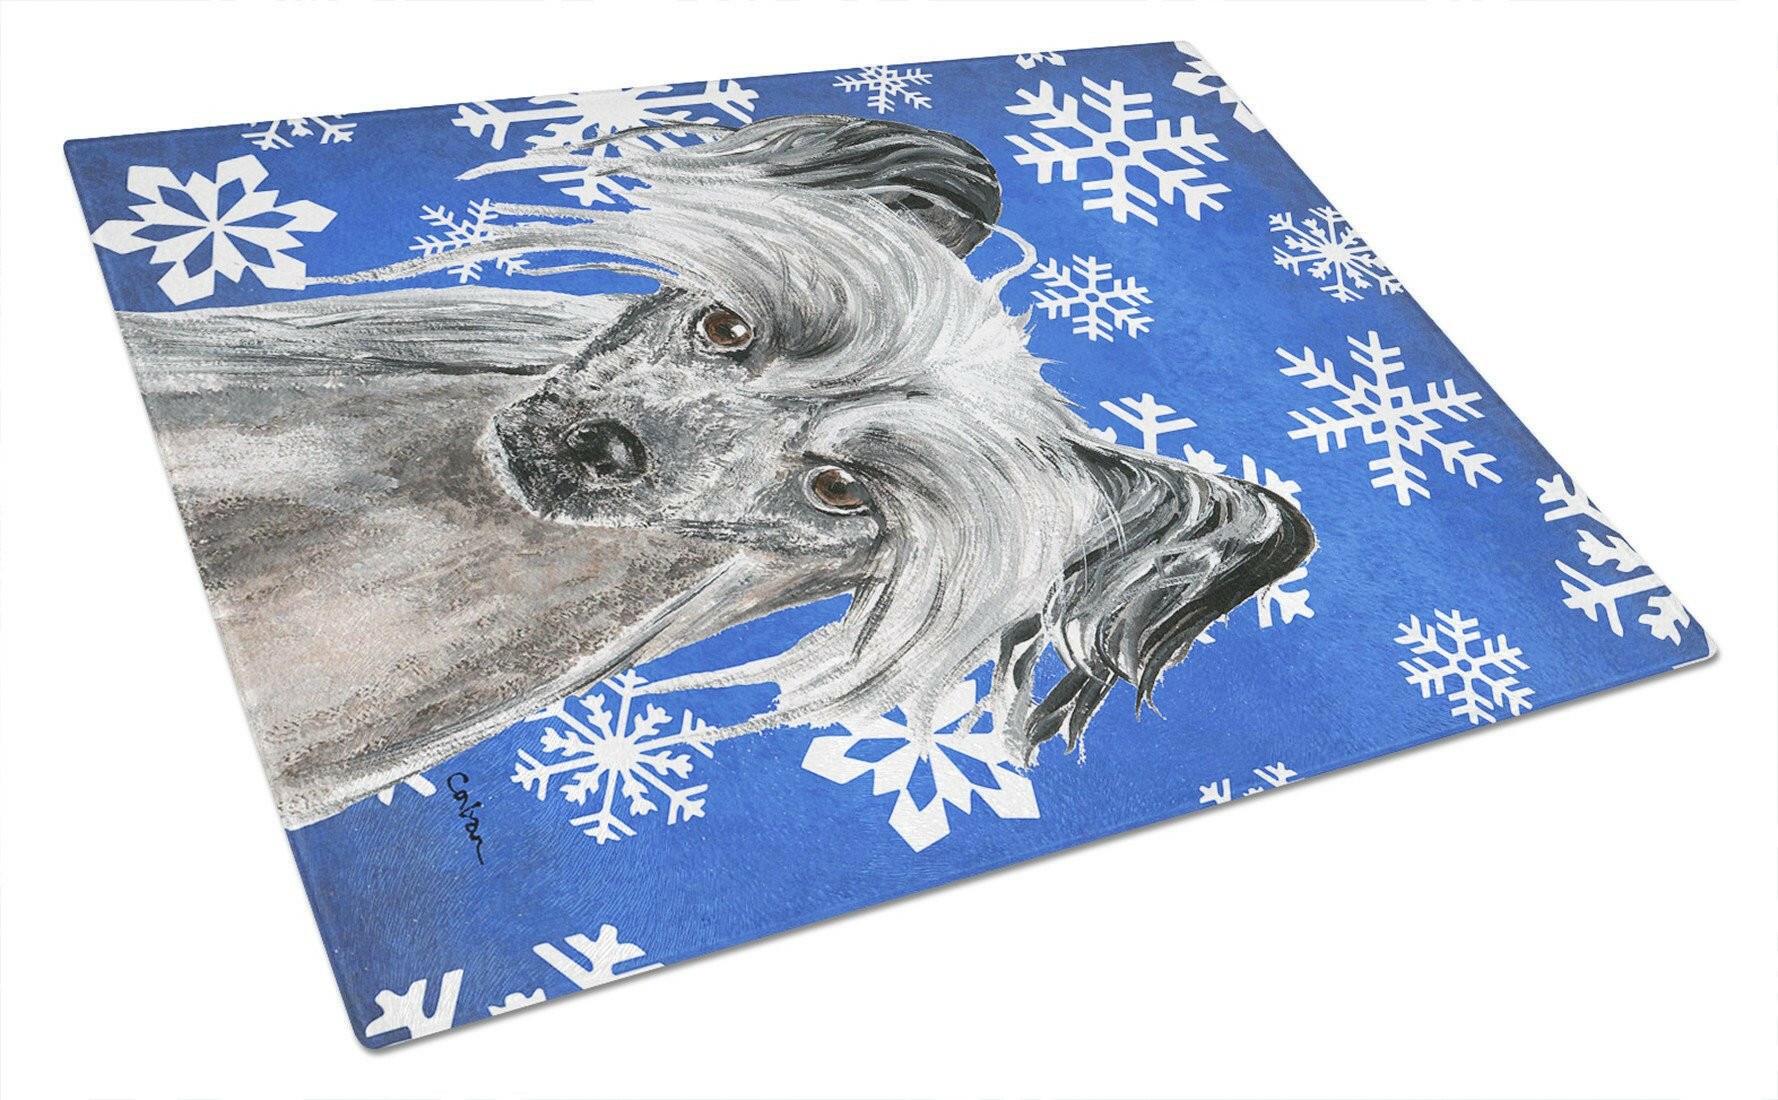 Chinese Crested Blue Snowflake Winter Glass Cutting Board Large by Caroline's Treasures